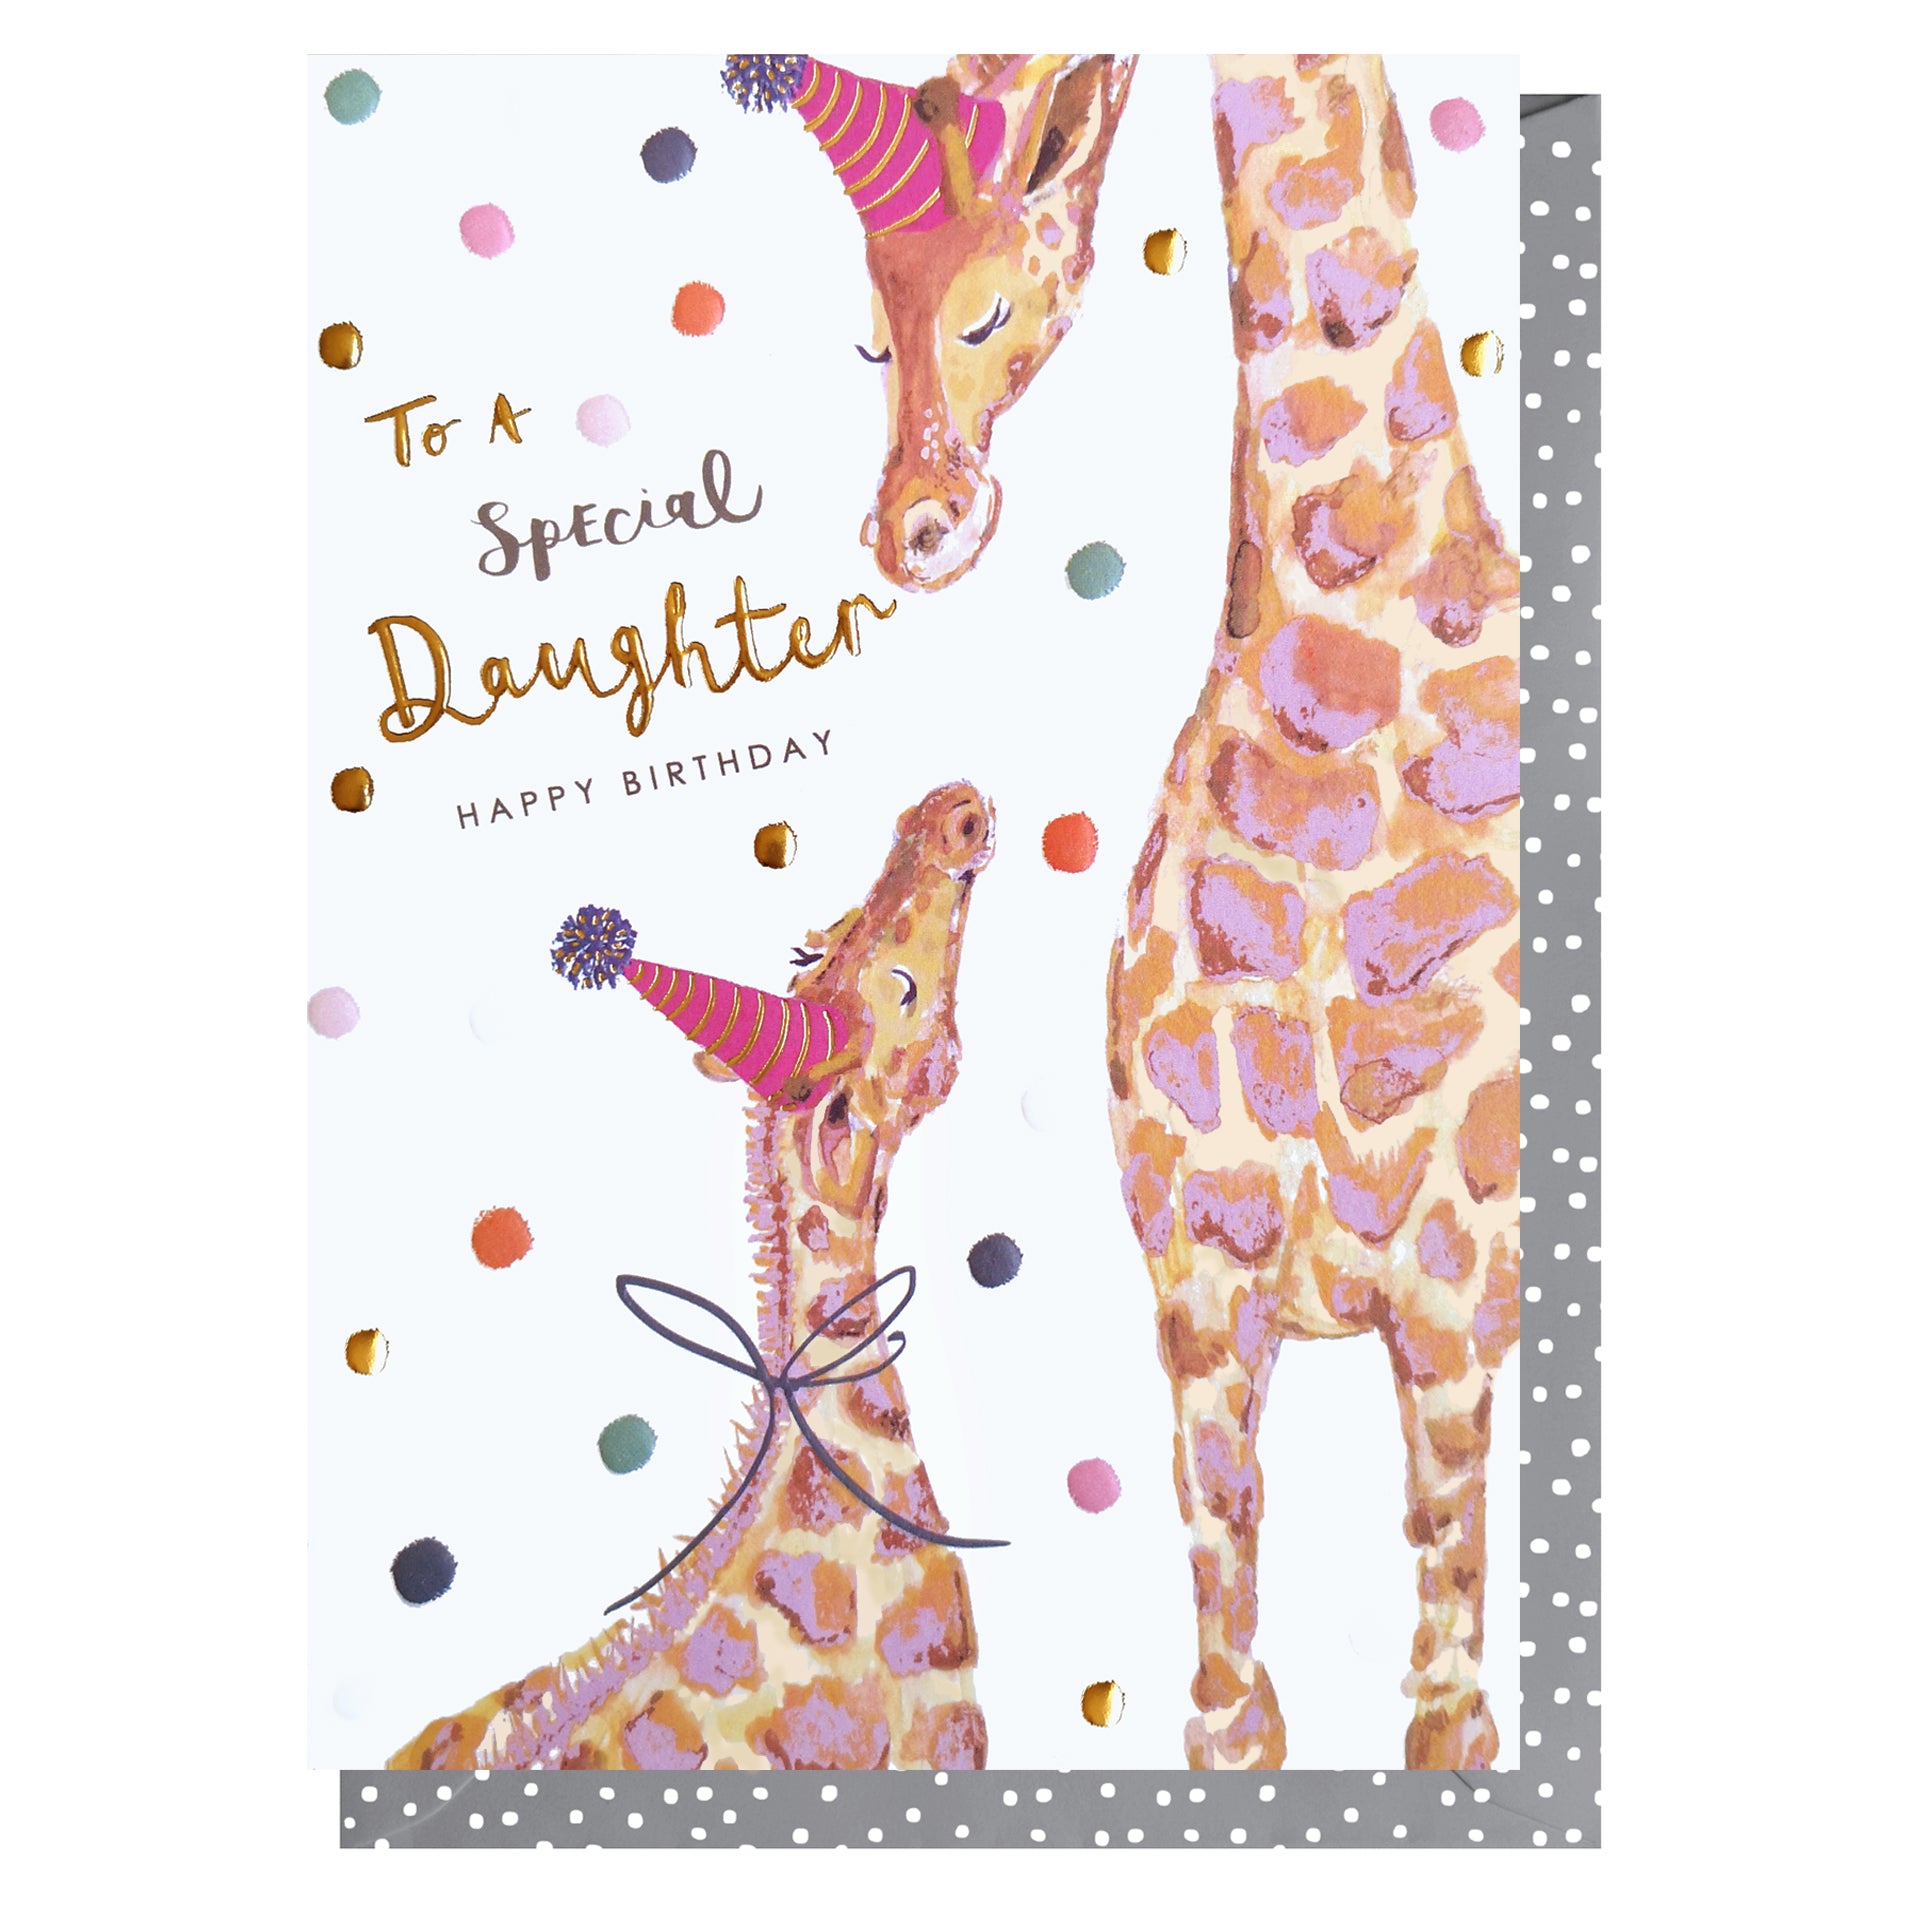 Daughter Giraffe Party Birthday Card from Penny Black